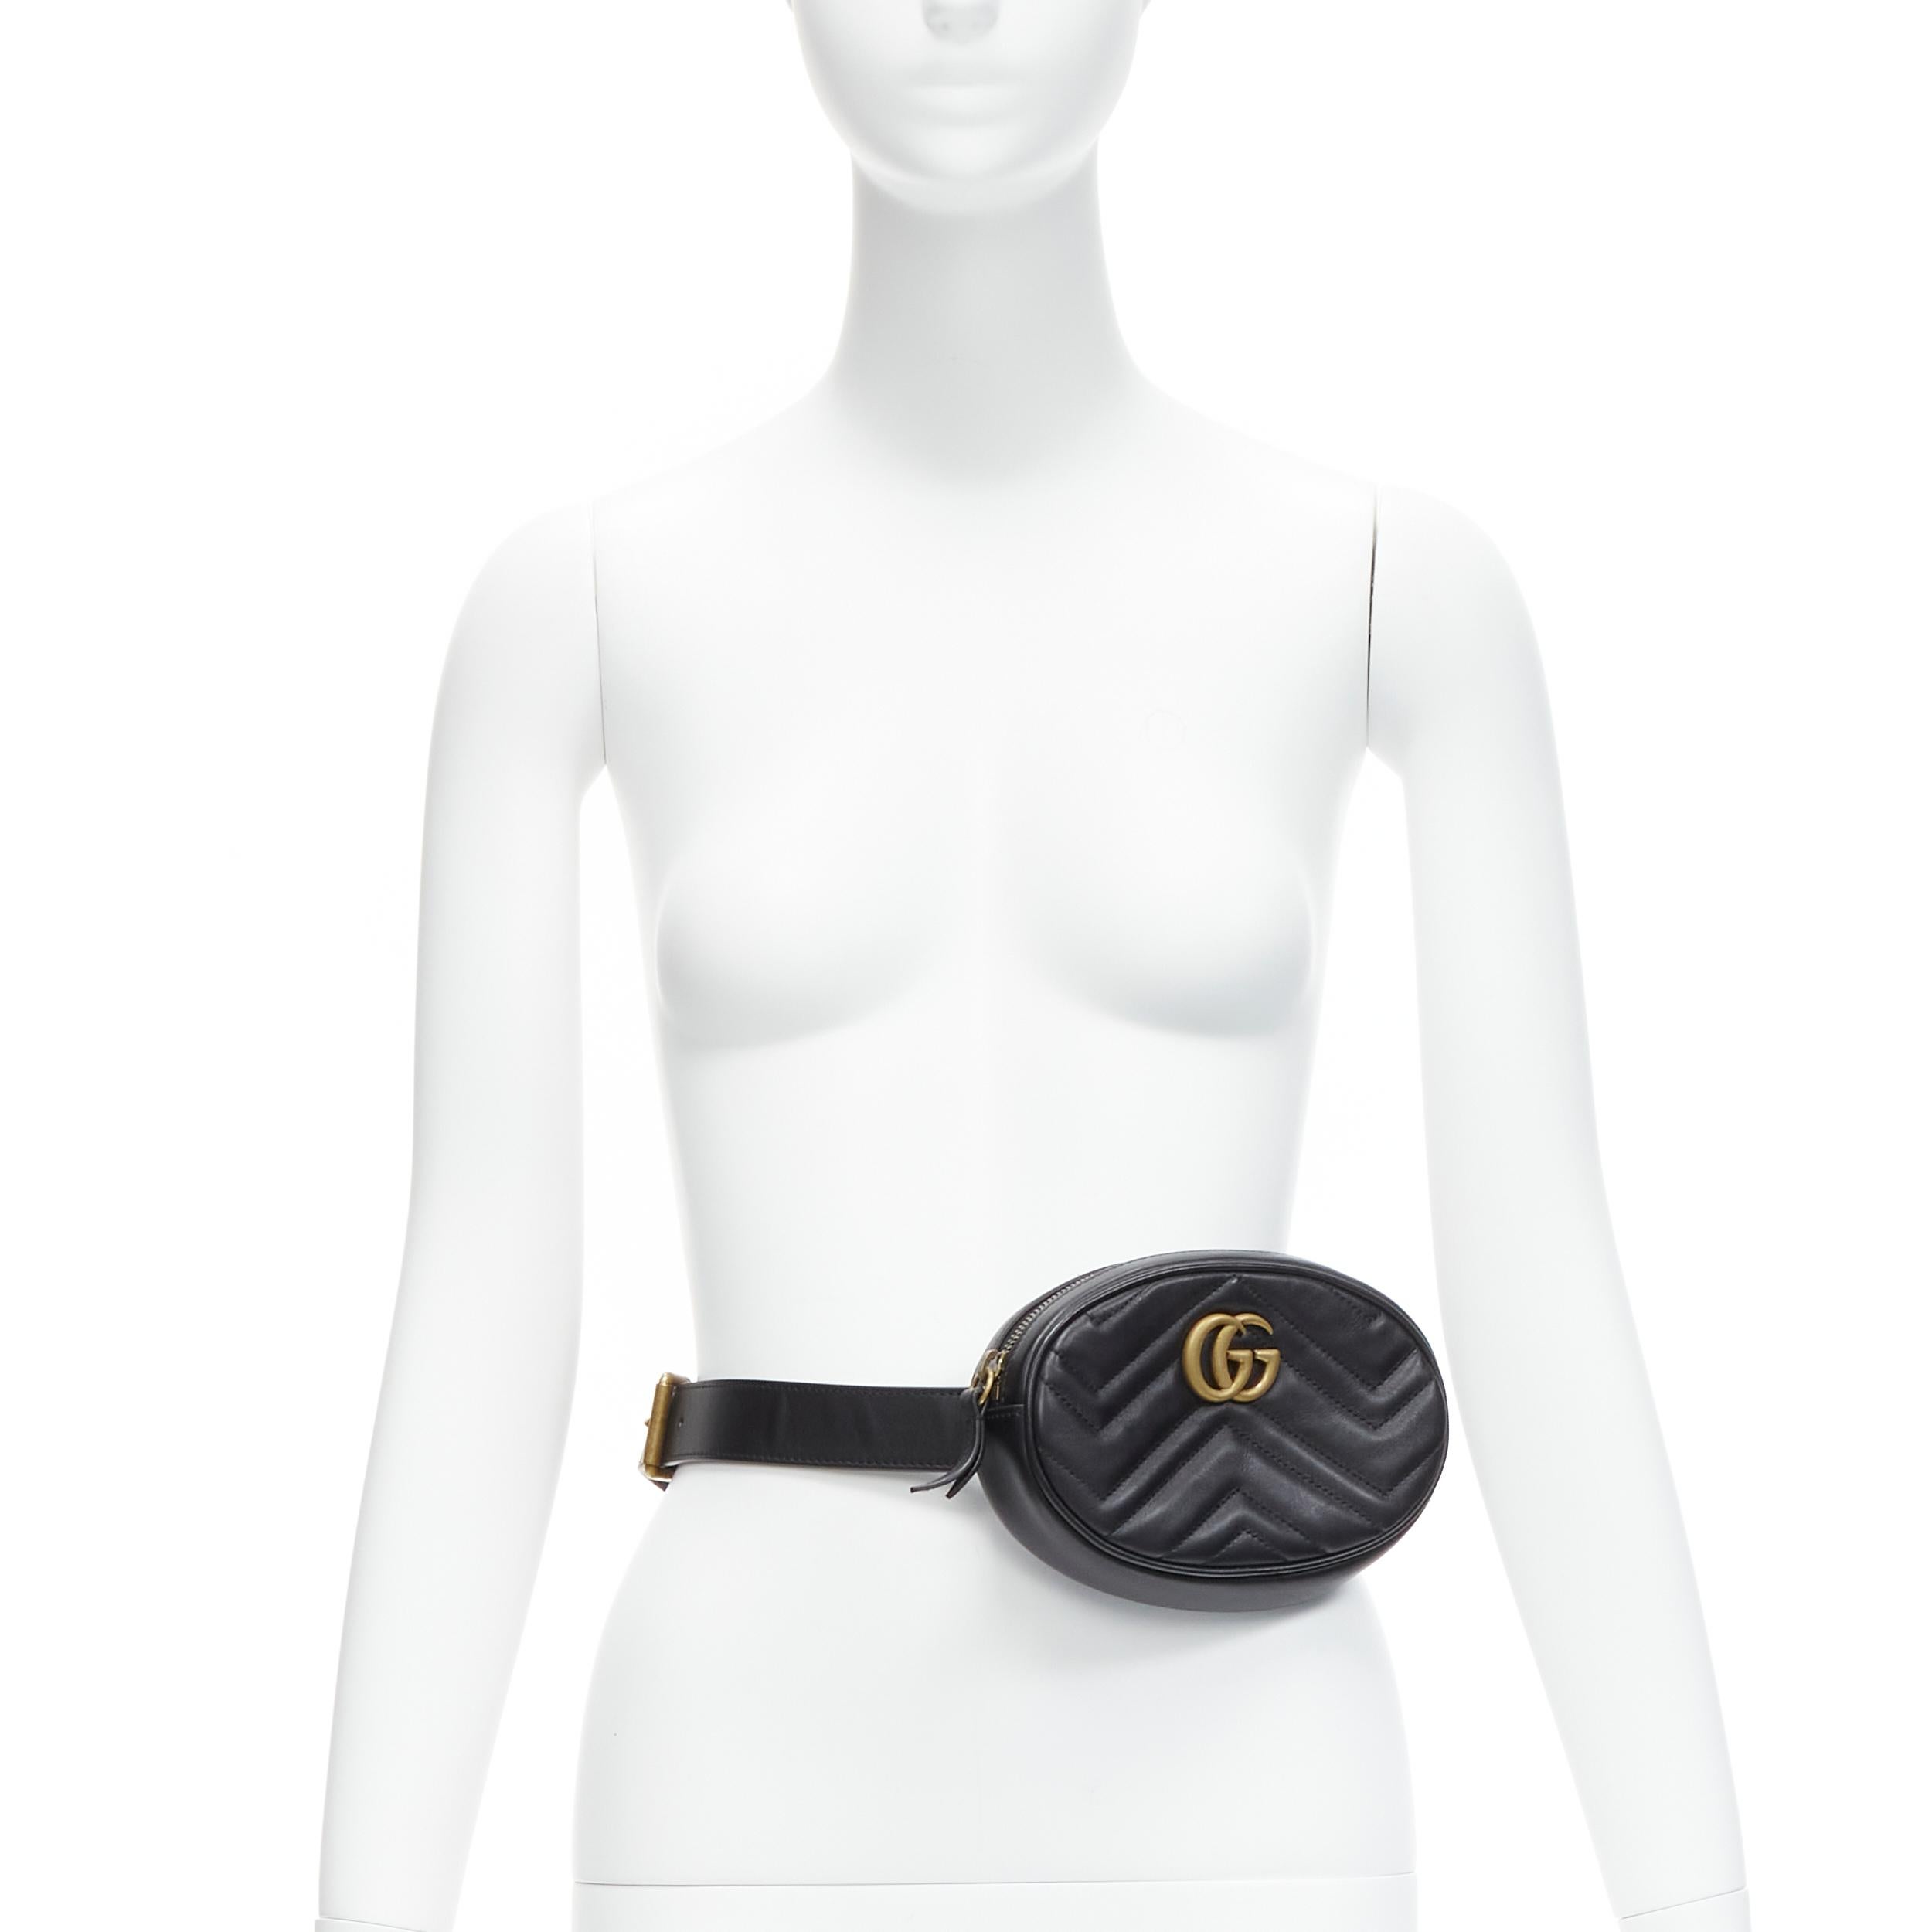 GUCCI Marmont black GG logo Matelasse leather round small belt bag
Reference: LNKO/A02134
Brand: Gucci
Collection: Marmont
Material: Leather, Metal
Color: Black, Gold
Pattern: Solid
Closure: Zip
Lining: Beige Leather
Made in: